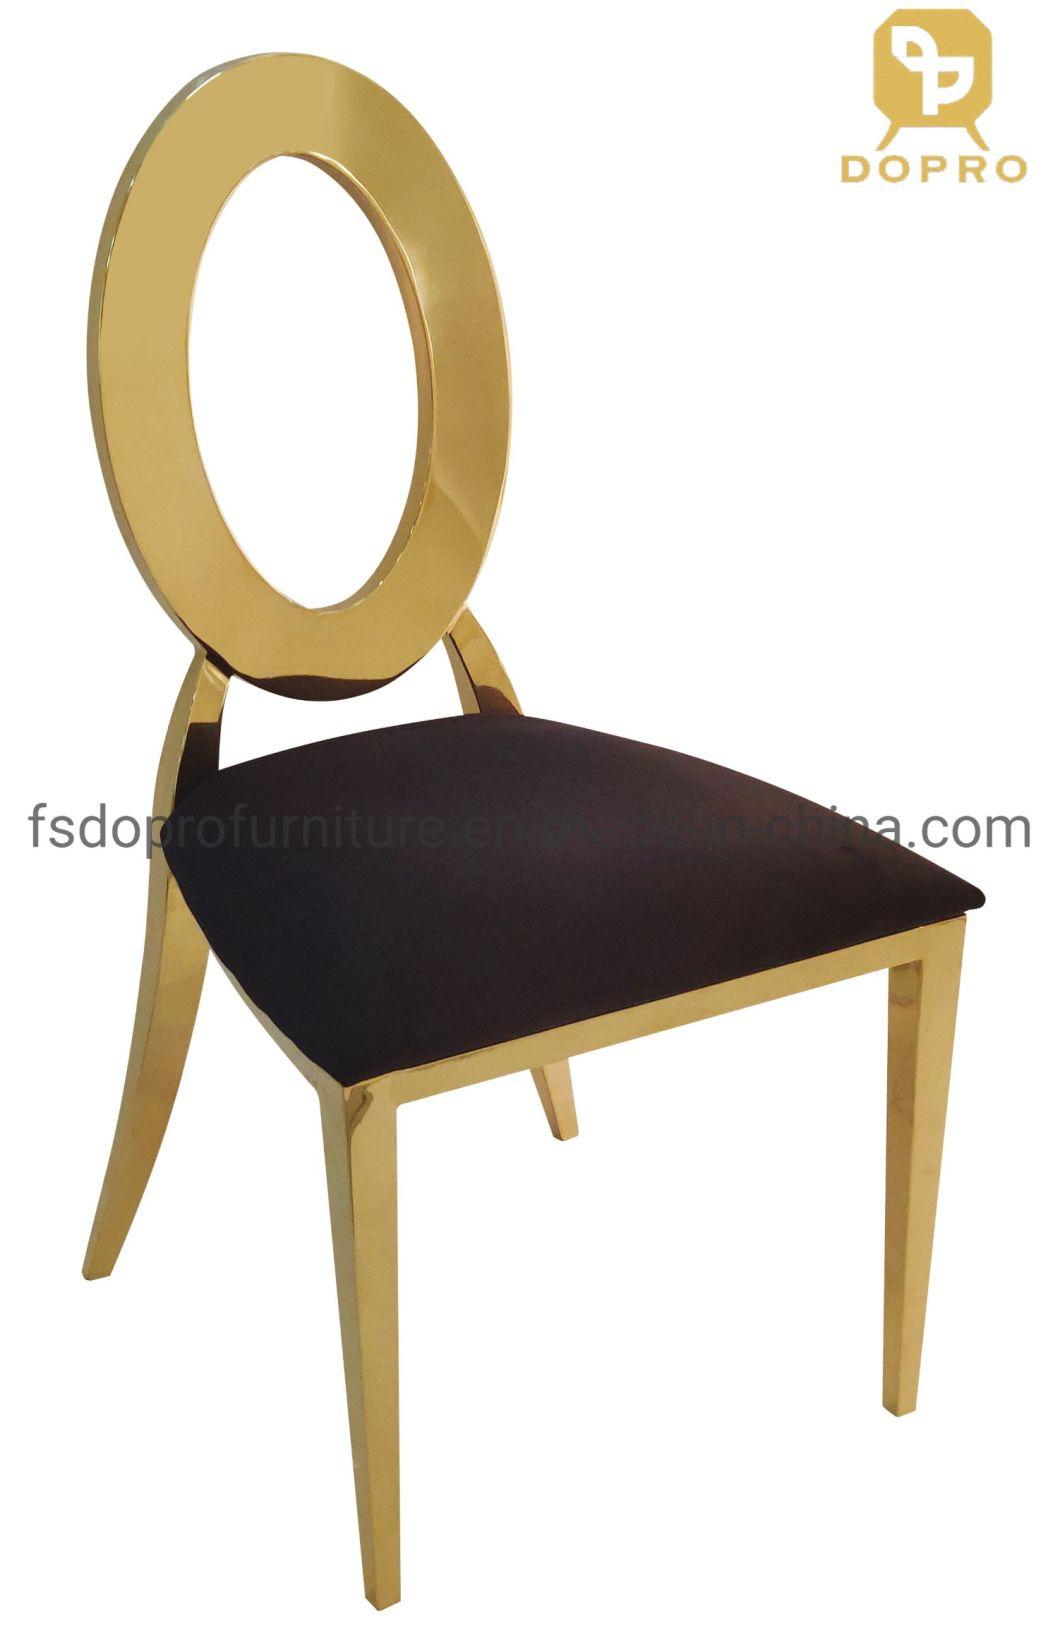 Luxury Modern Titanium Gold Plated Stainless Steel Dining Chair for Wedding and Event